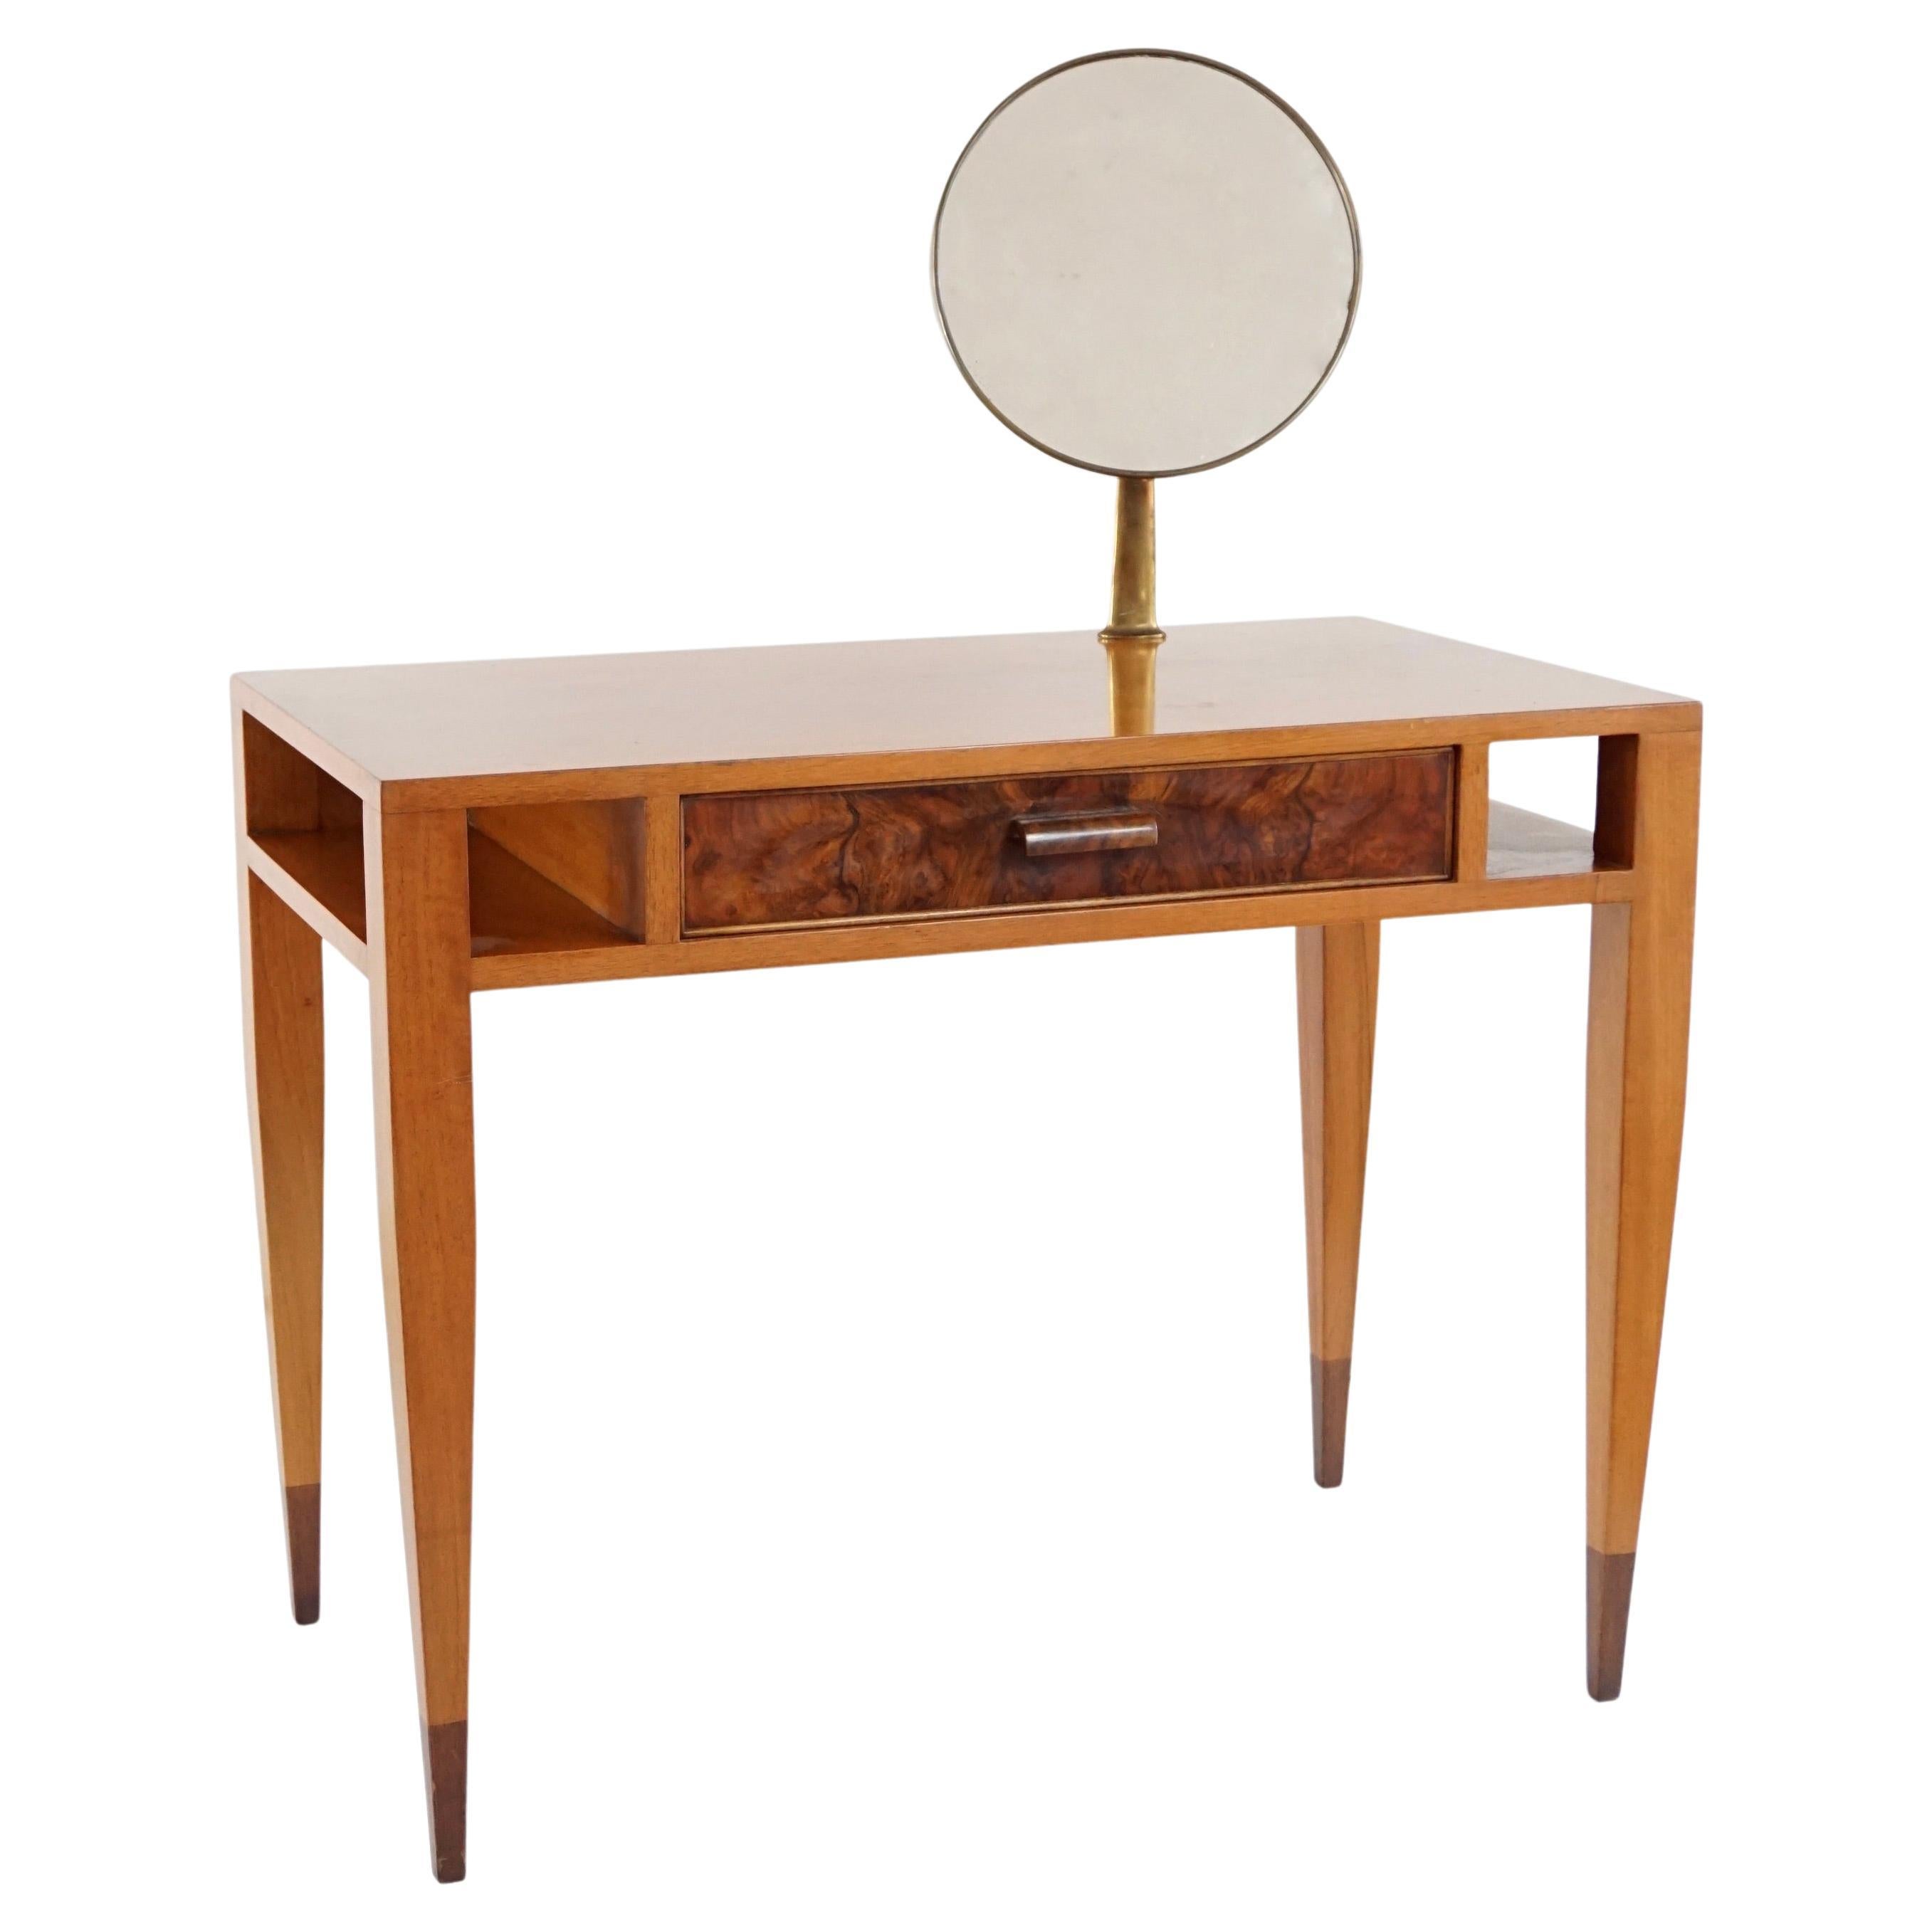 Gio Ponti vanity desk console table with a adjustable Fontana arte mirror, 1950 For Sale